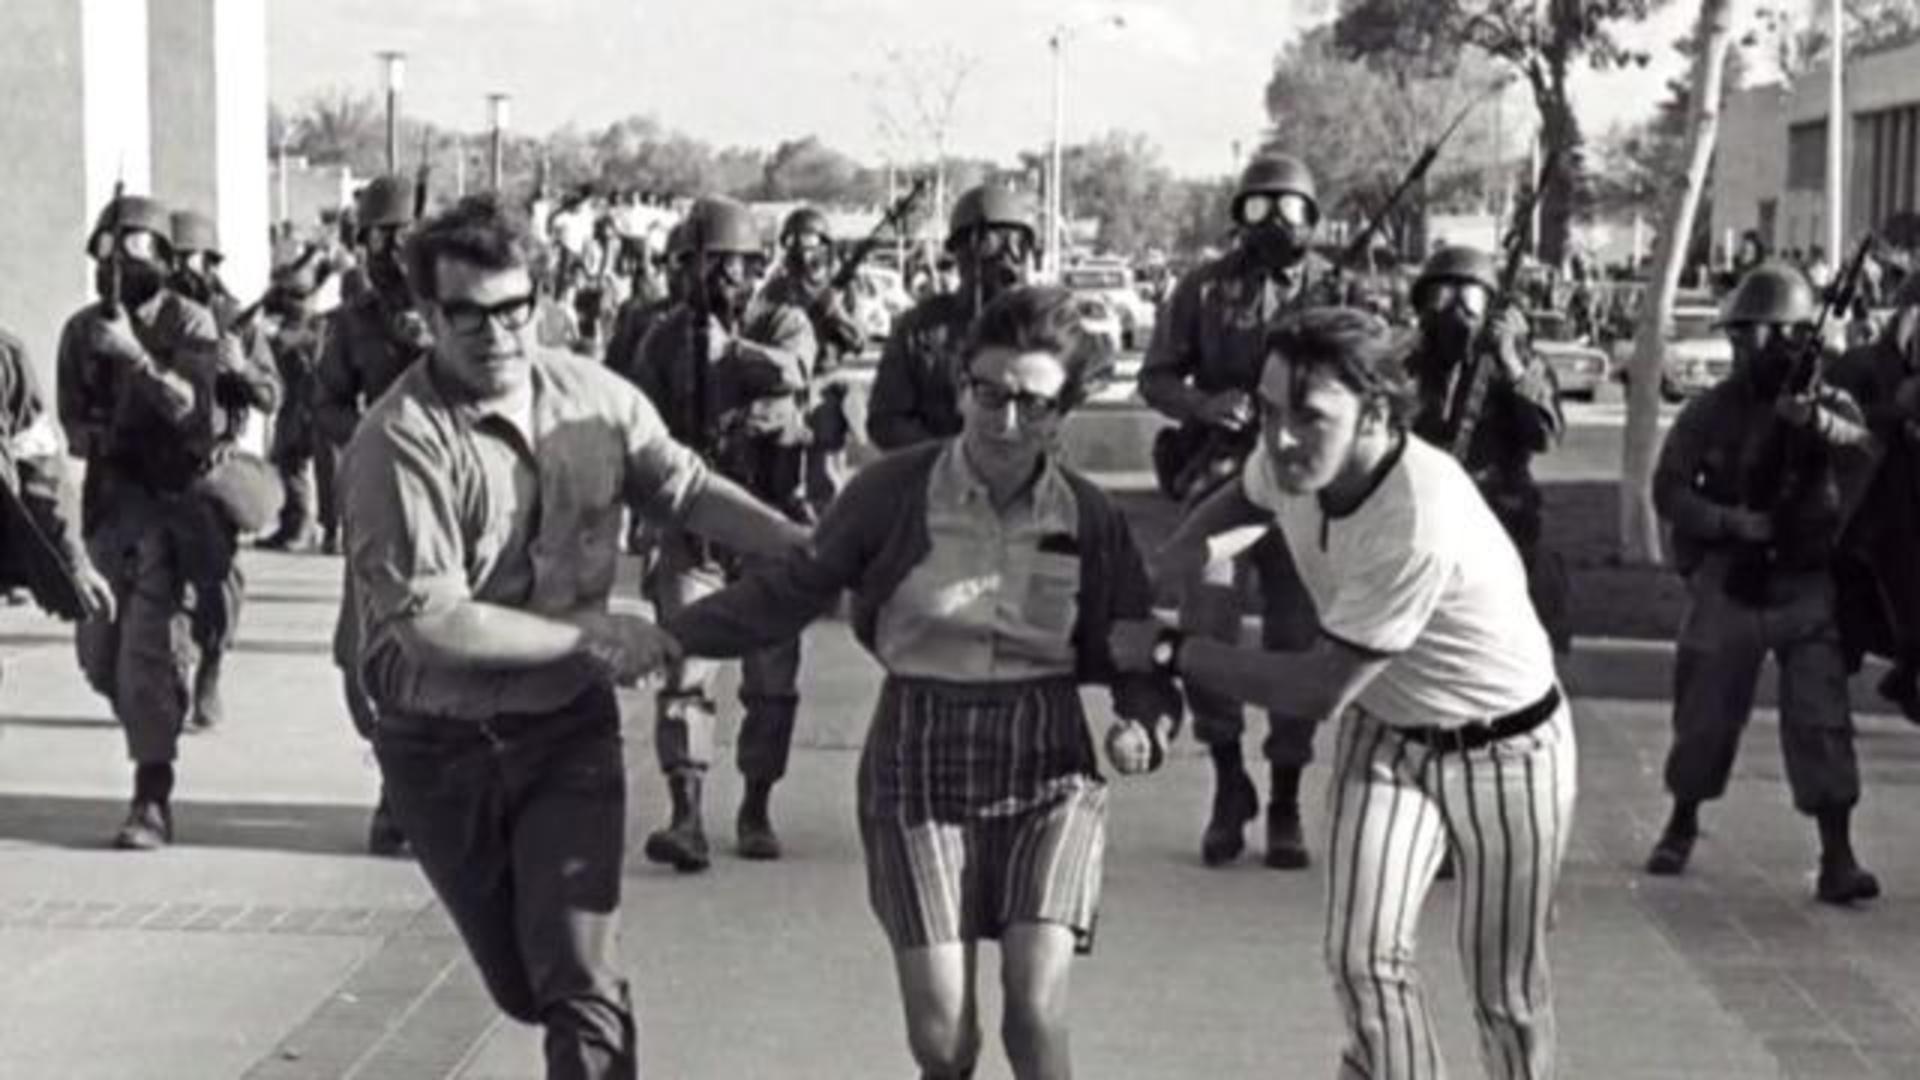 Former Kent State students speak out, 50 years after deadly ...